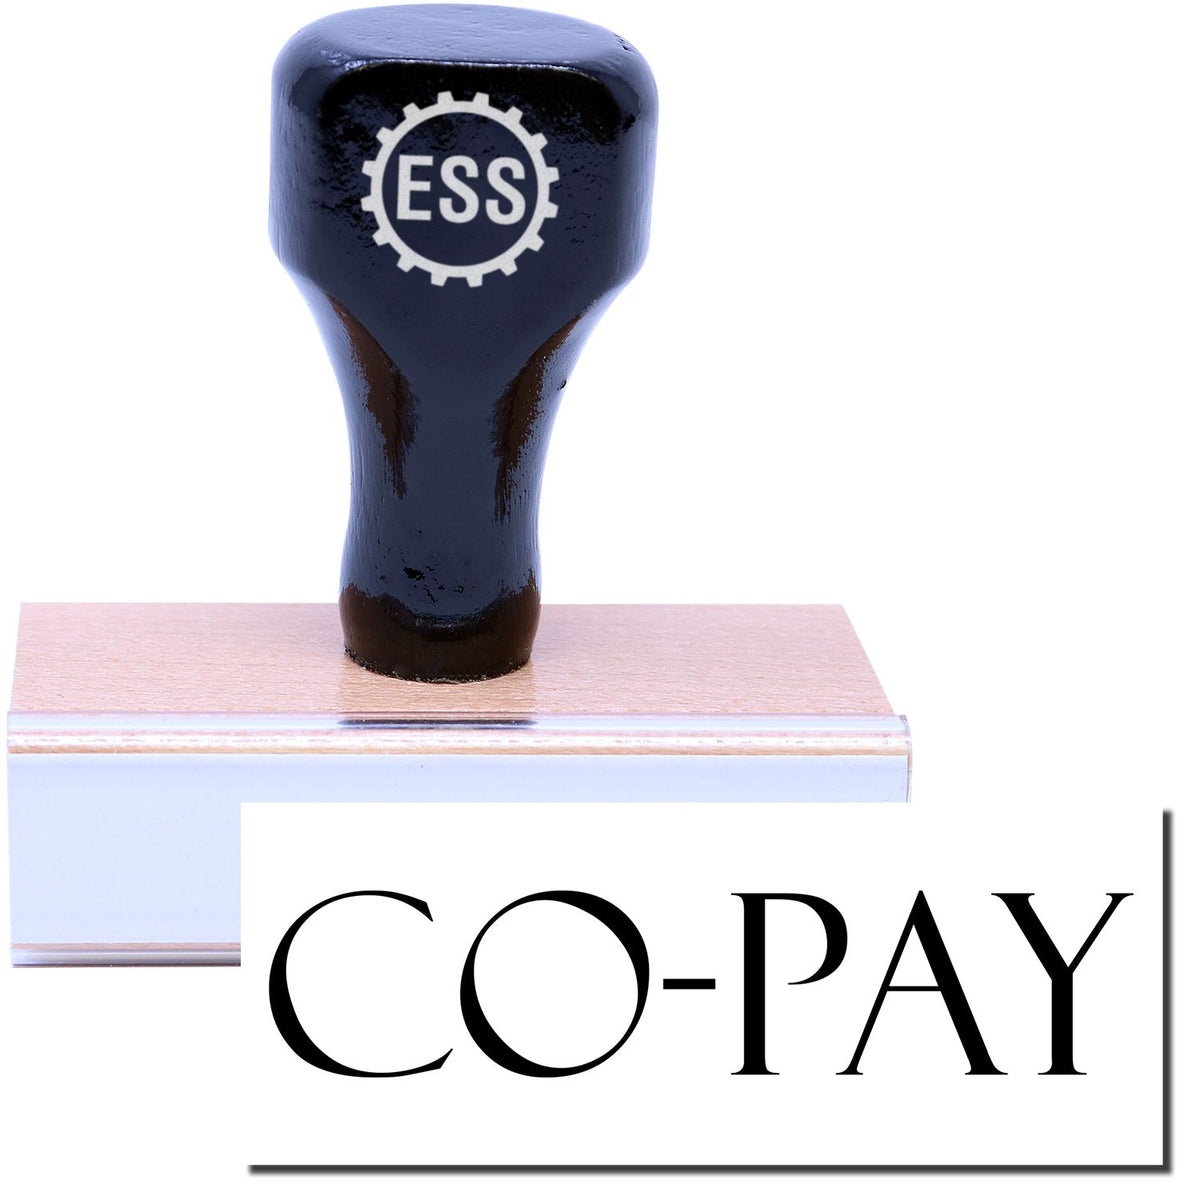 A stock office rubber stamp with a stamped image showing how the text &quot;CO-PAY&quot; in a large font is displayed after stamping.